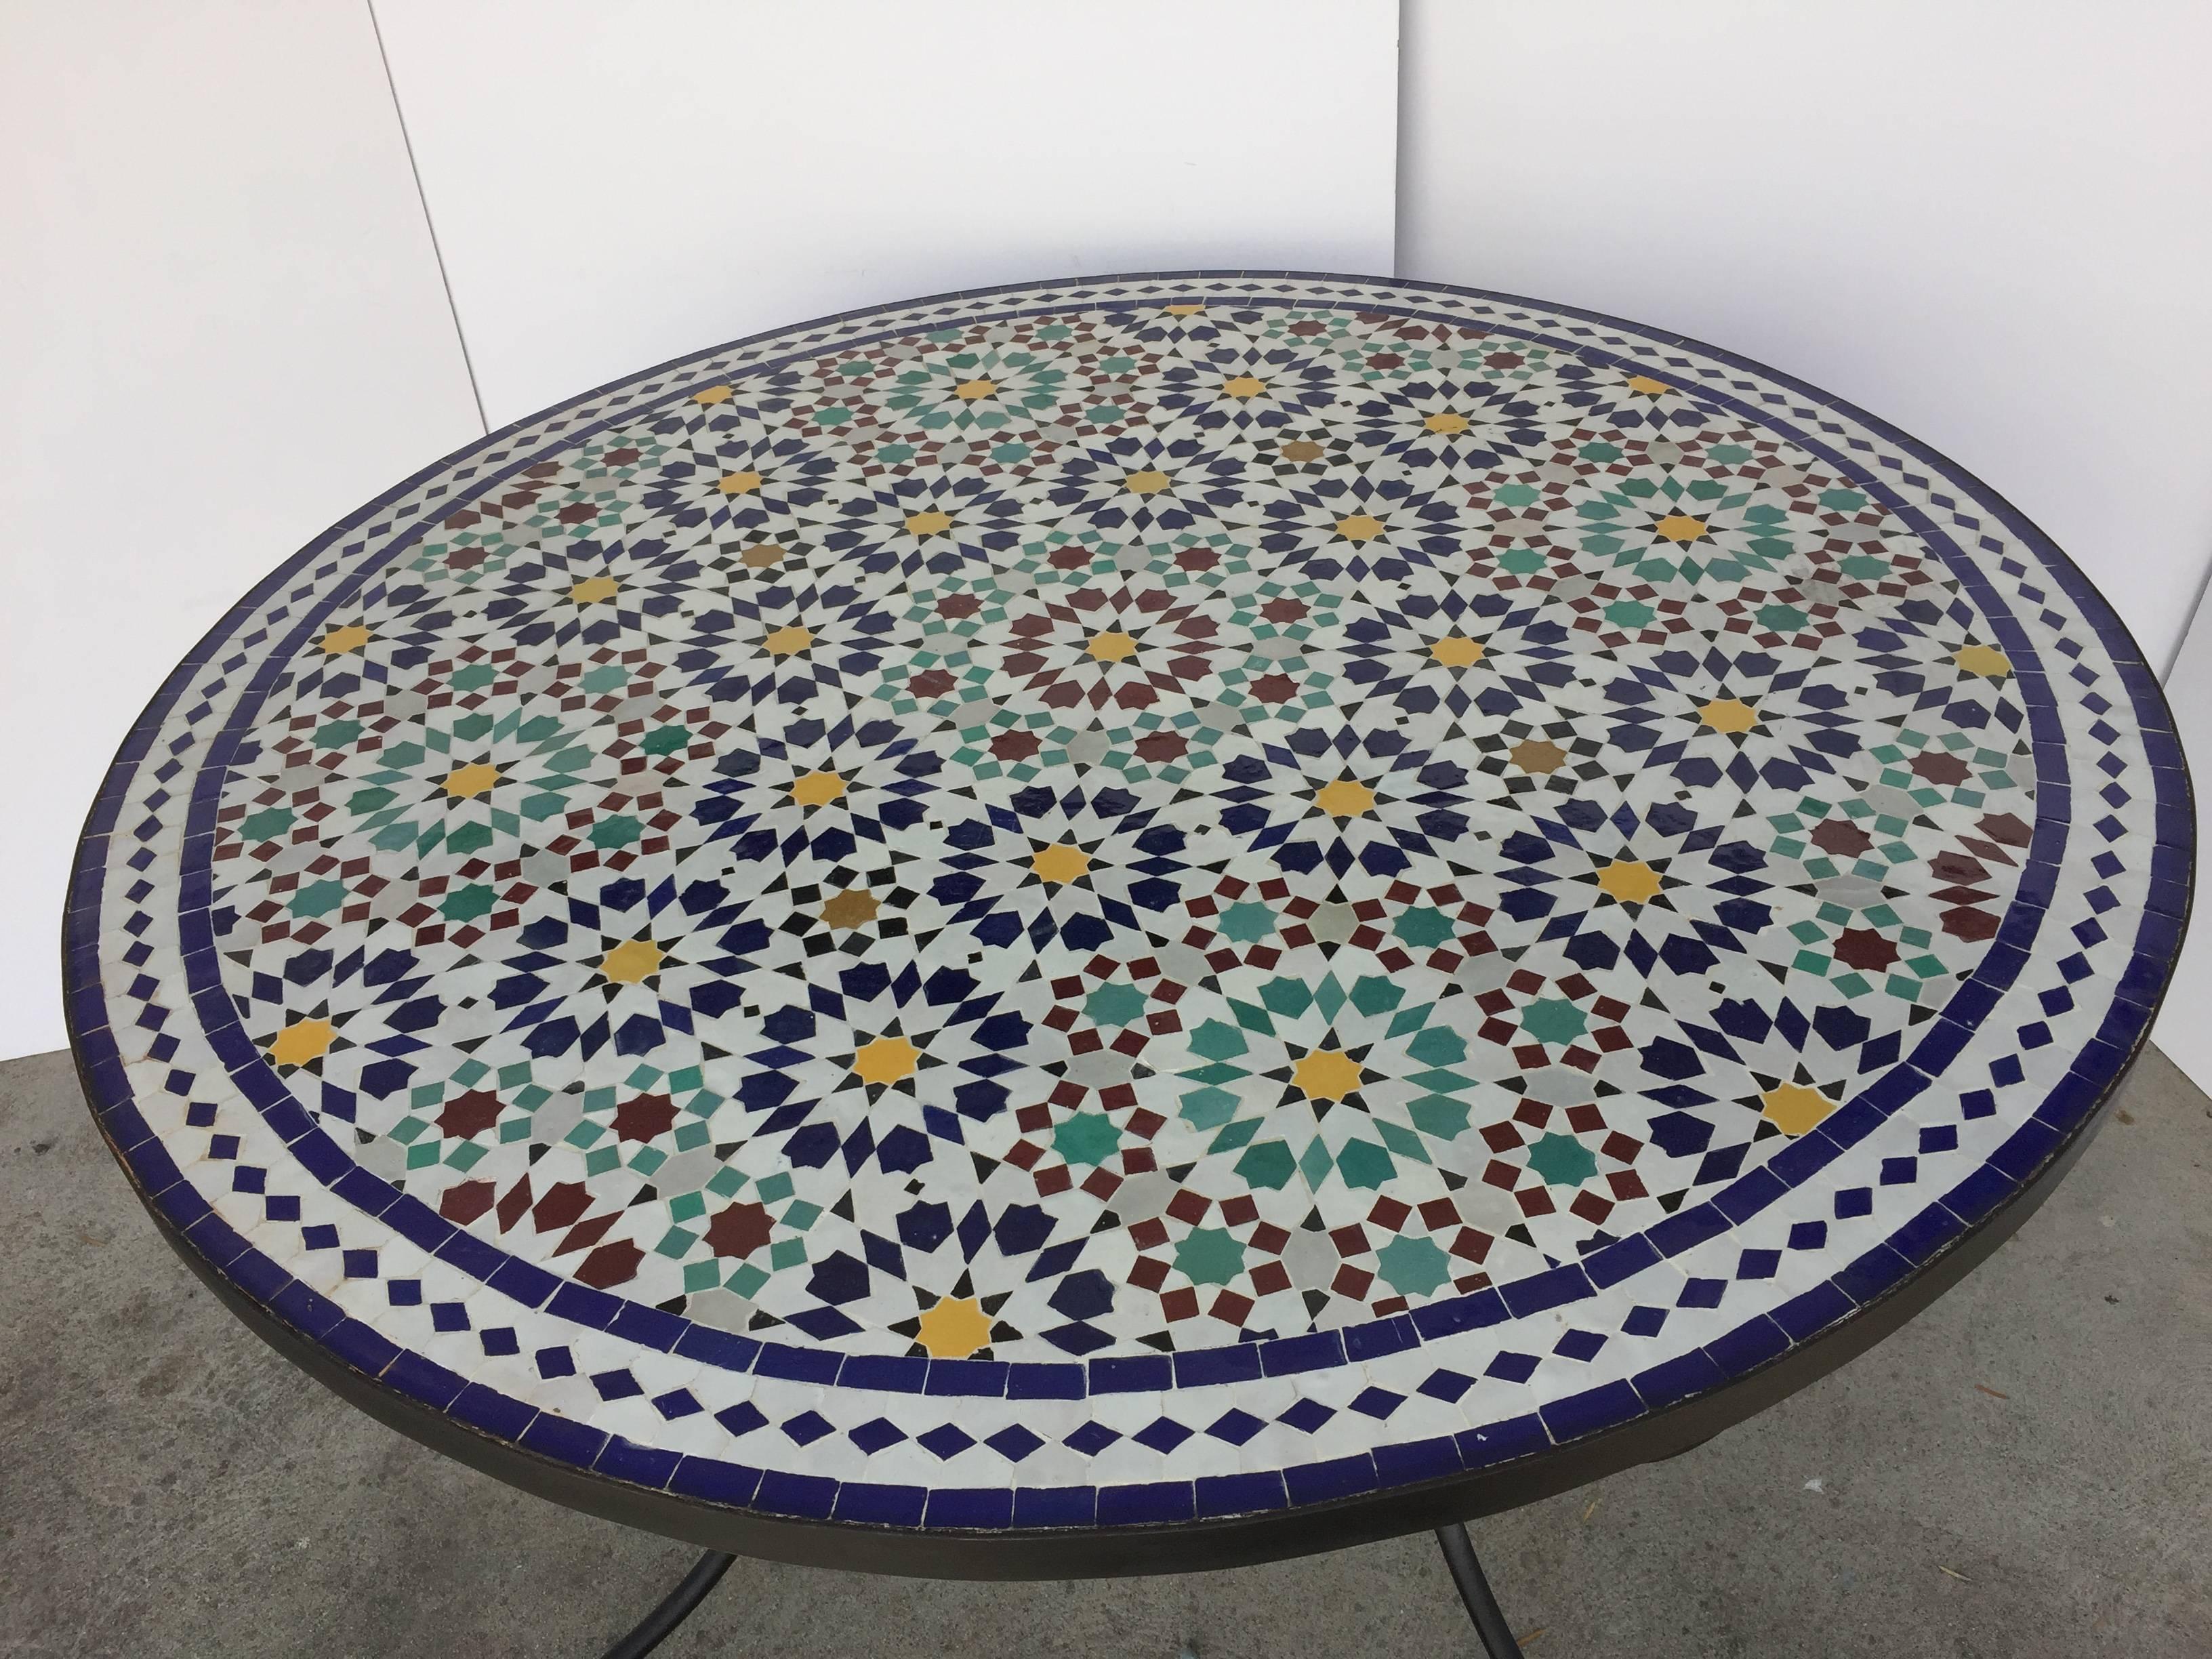 Moroccan round mosaic tile table delicately handcrafted by expert artisans in Fez, Morocco, using reclaimed old glazed tiles inlaid in concrete with traditional Islamic Moorish geometrical design in white, blue, red, green and green colors.
Moroccan